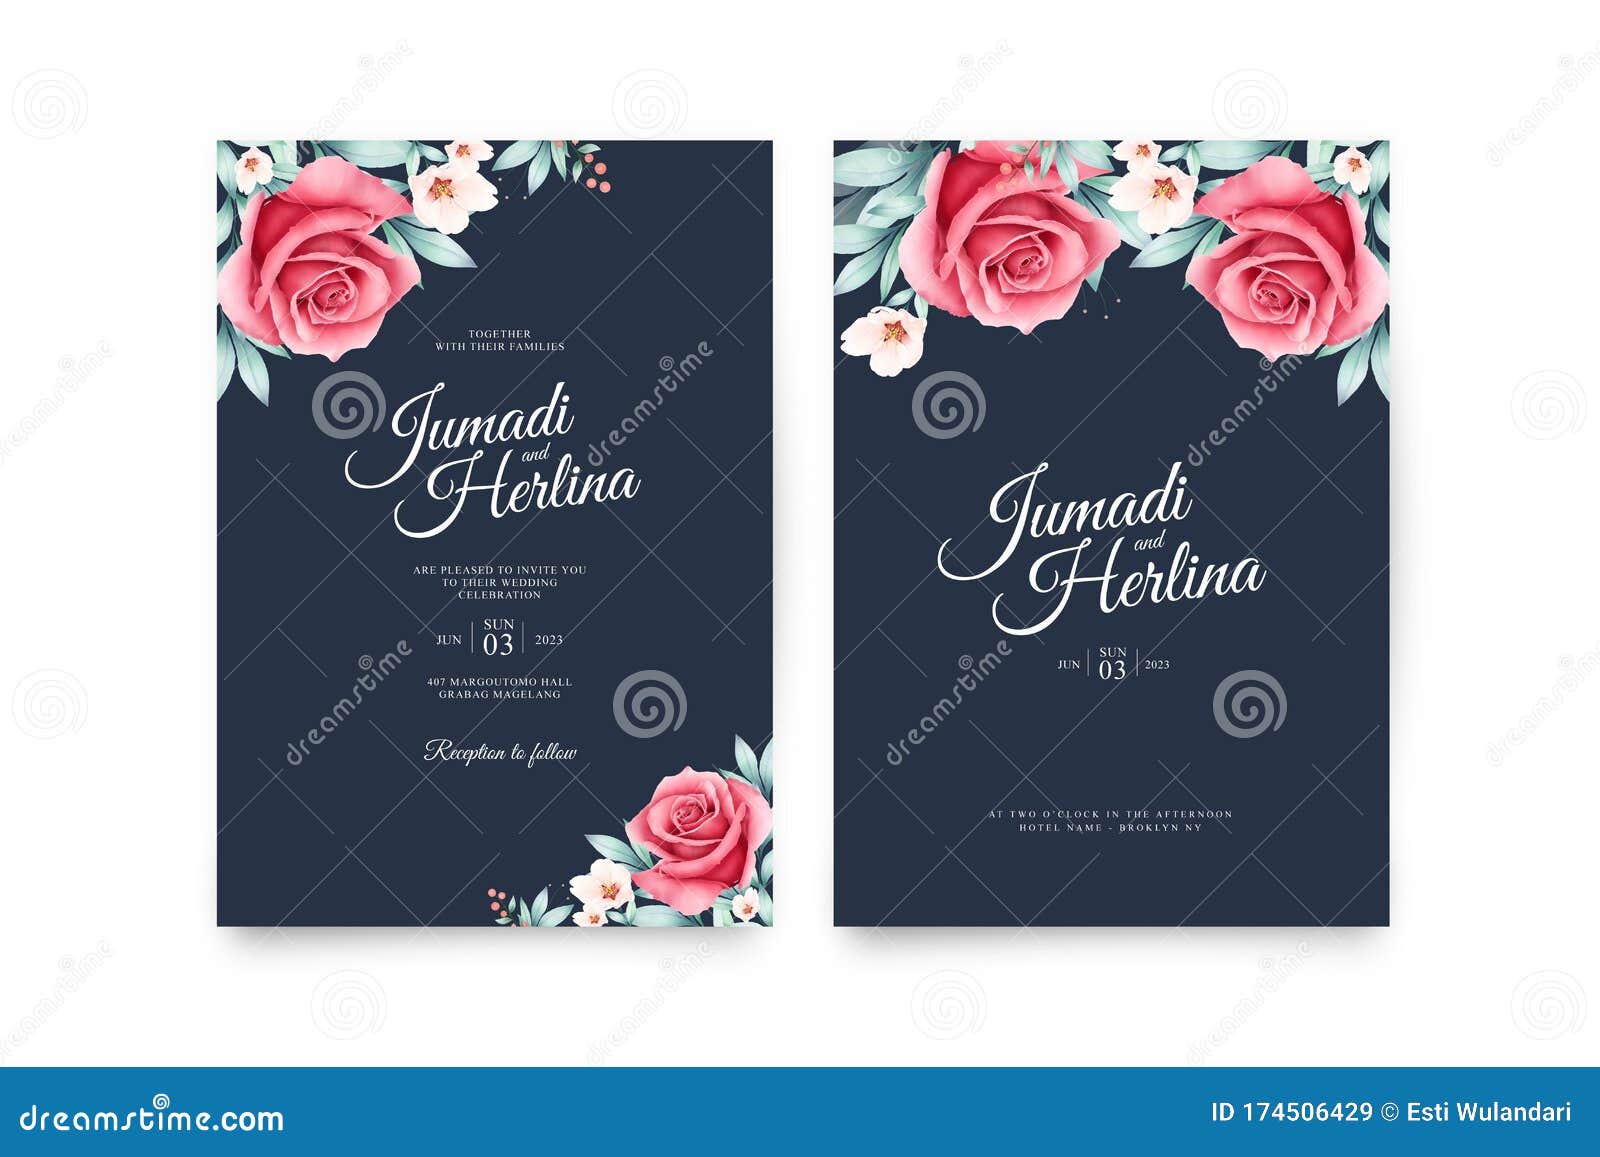 Elegant Wedding Invitation Template with Beautiful Floral Watercolor on  Dark Background Stock Vector - Illustration of paint, hand: 174506429